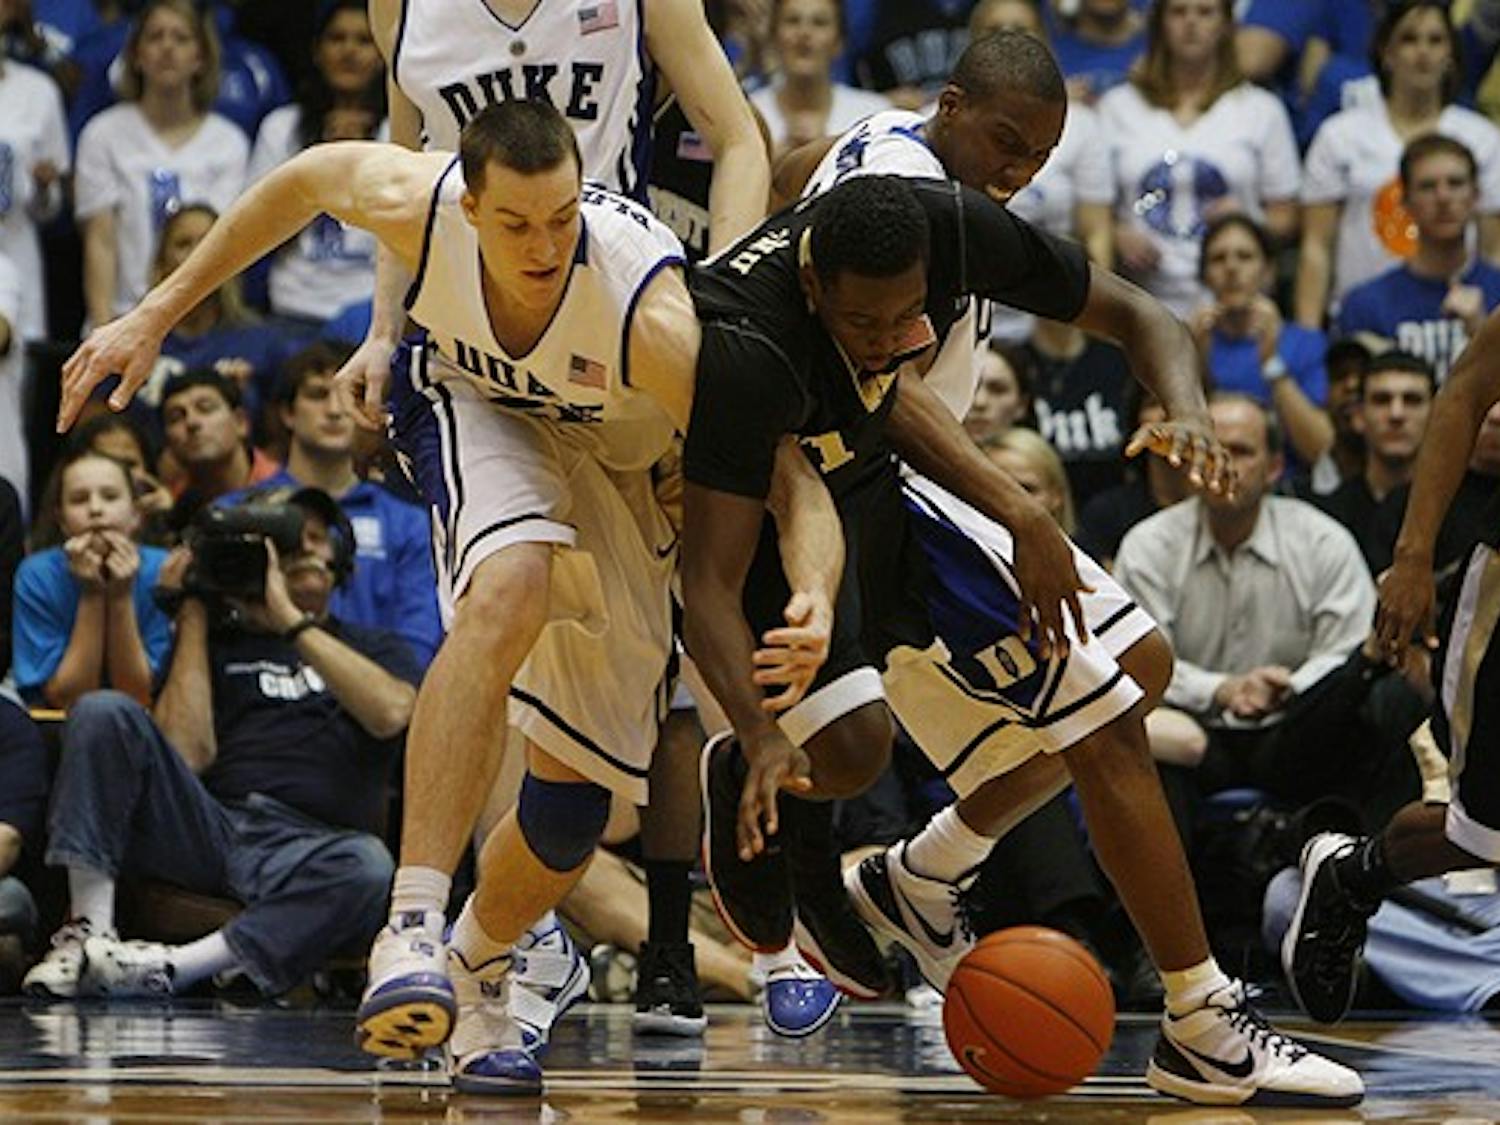 Duke’s Miles Plumlee (left) and Wake Forest’s Al-Farouq Aminu (right), the key figures of Sunday’s contest between the two ACC rivals, battle for a loose ball during the Blue Devils’ 90-70 win in Cameron Indoor Stadium.